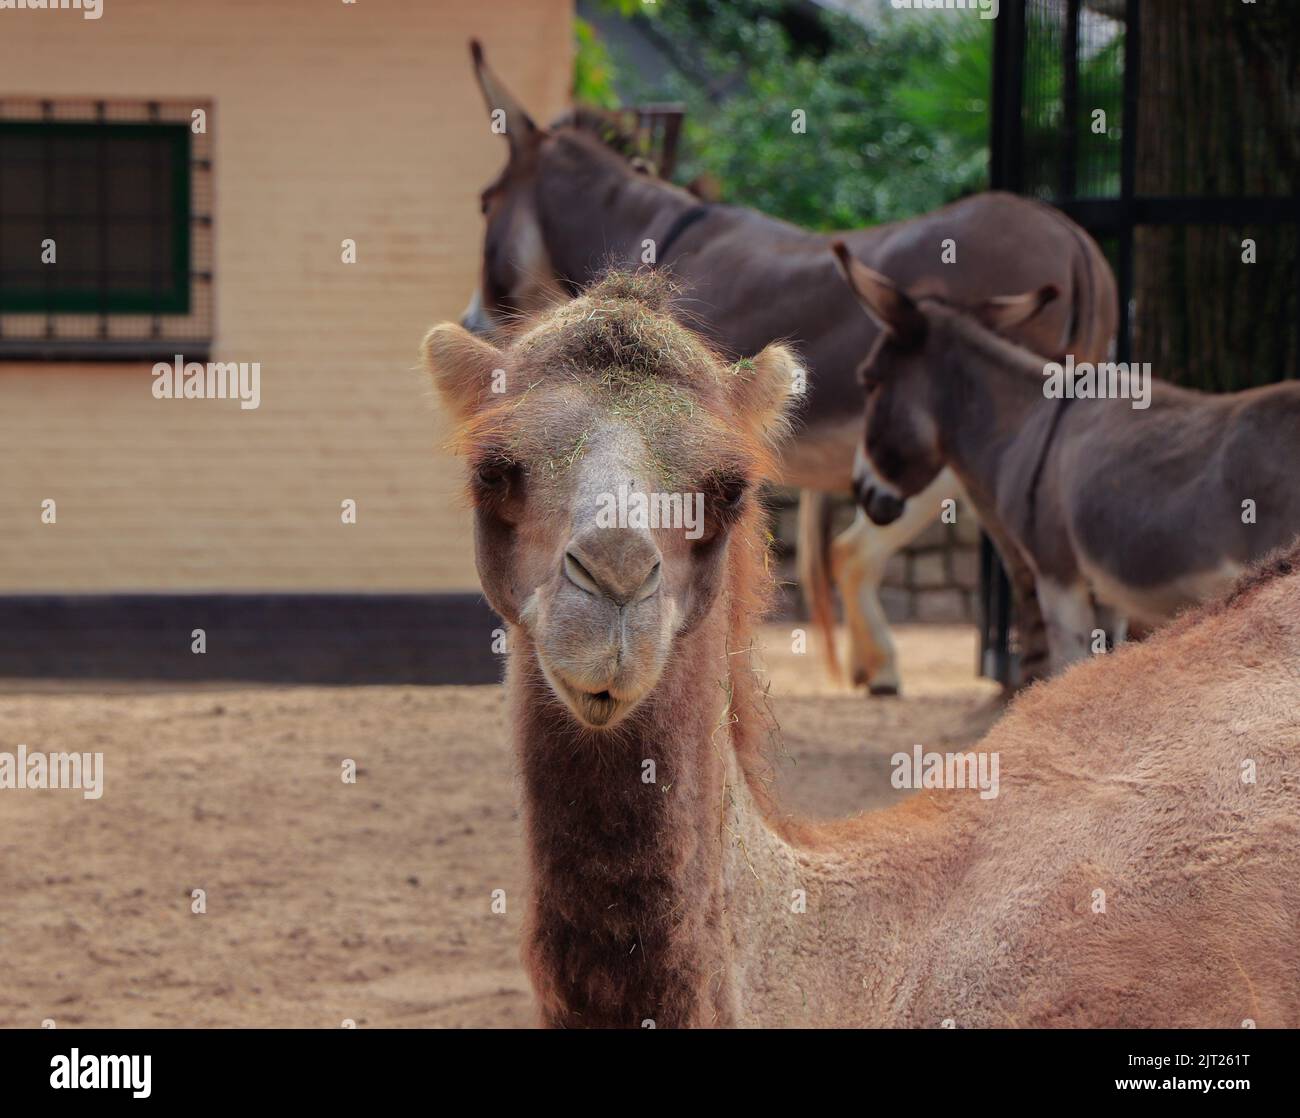 A portrait of a camel in the zoo in summer Stock Photo